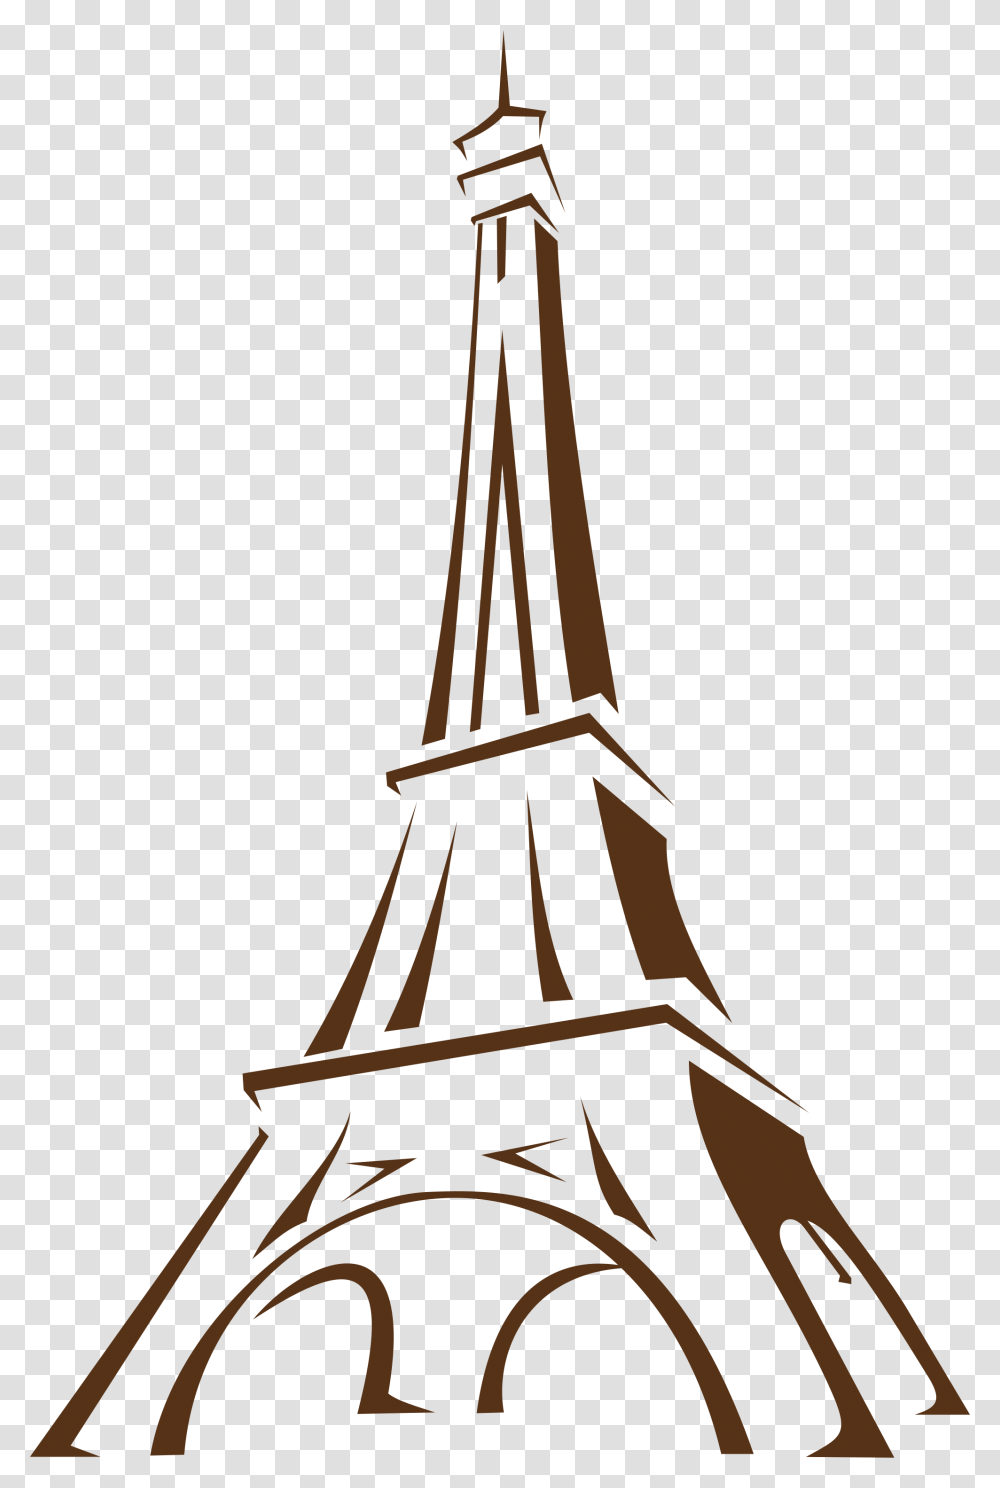 Eiffel Tower Hd, Architecture, Building, Spire, Steeple Transparent Png